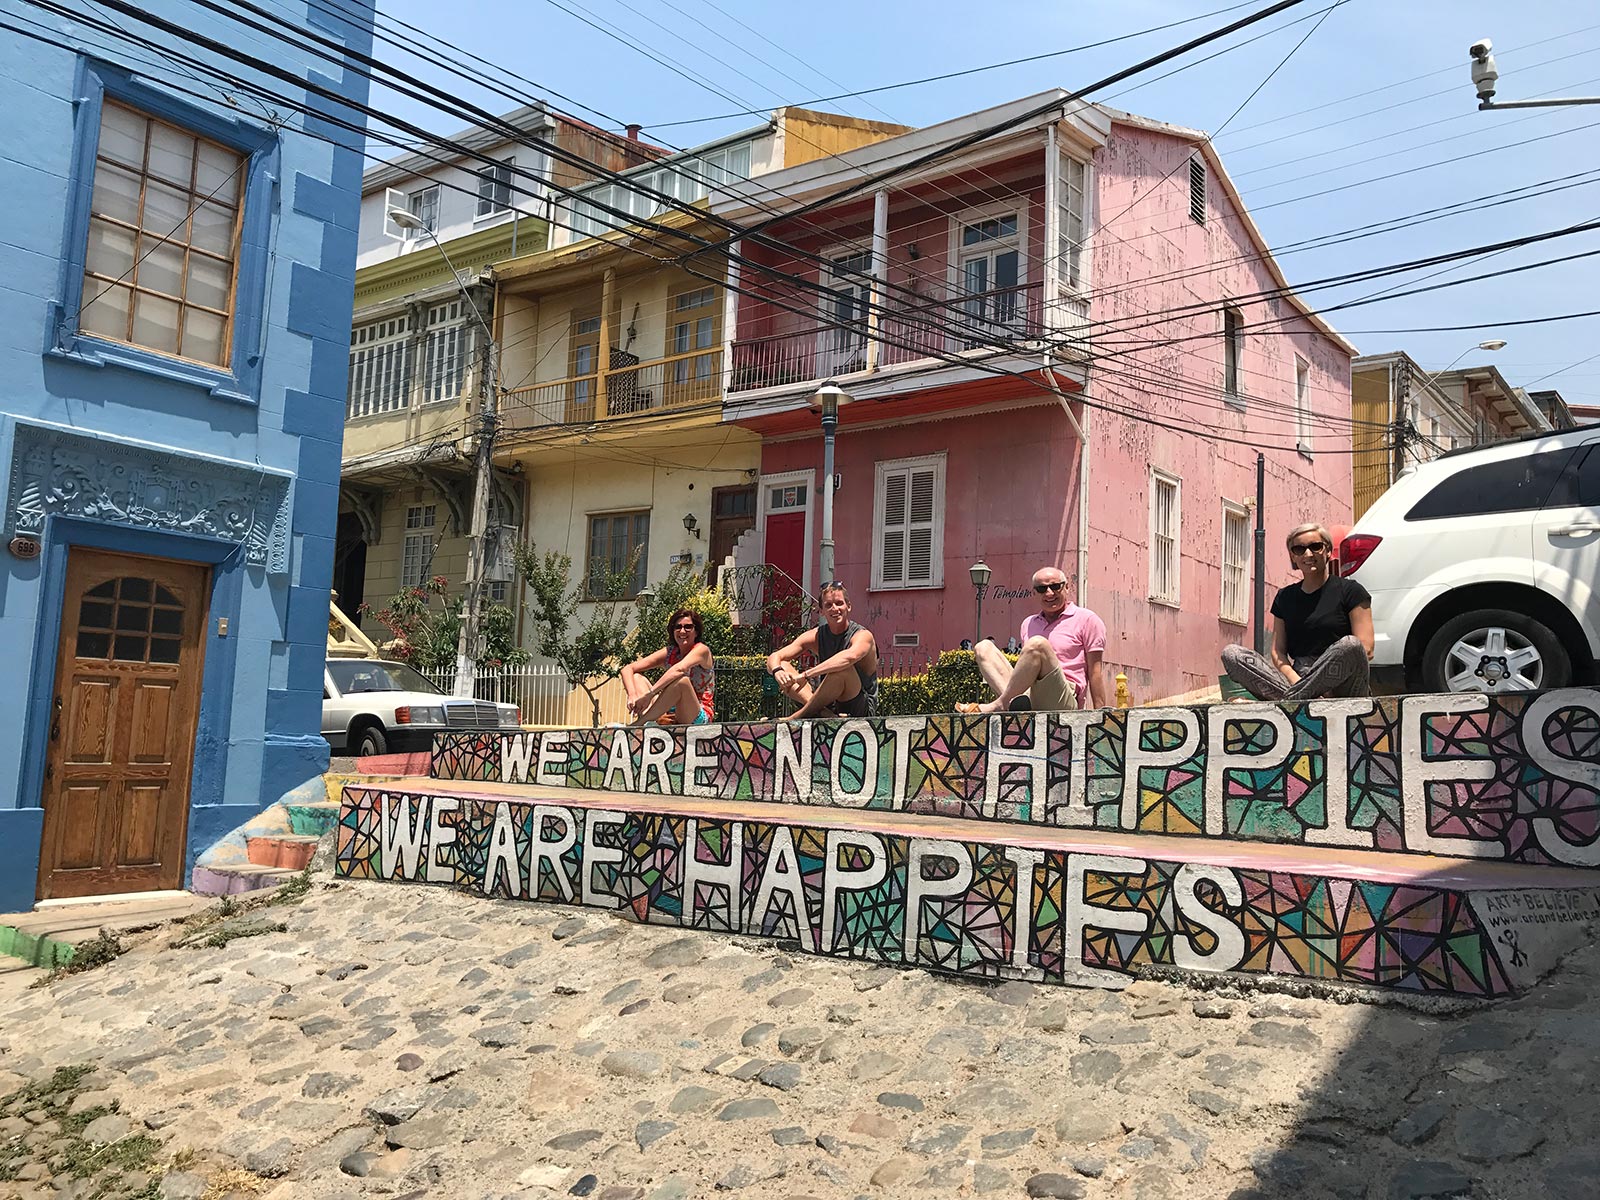 David Simpson and family sitting on a colorful steps in Valparaiso, Chile. Valparaiso & The Cruise to the end of the World pt3